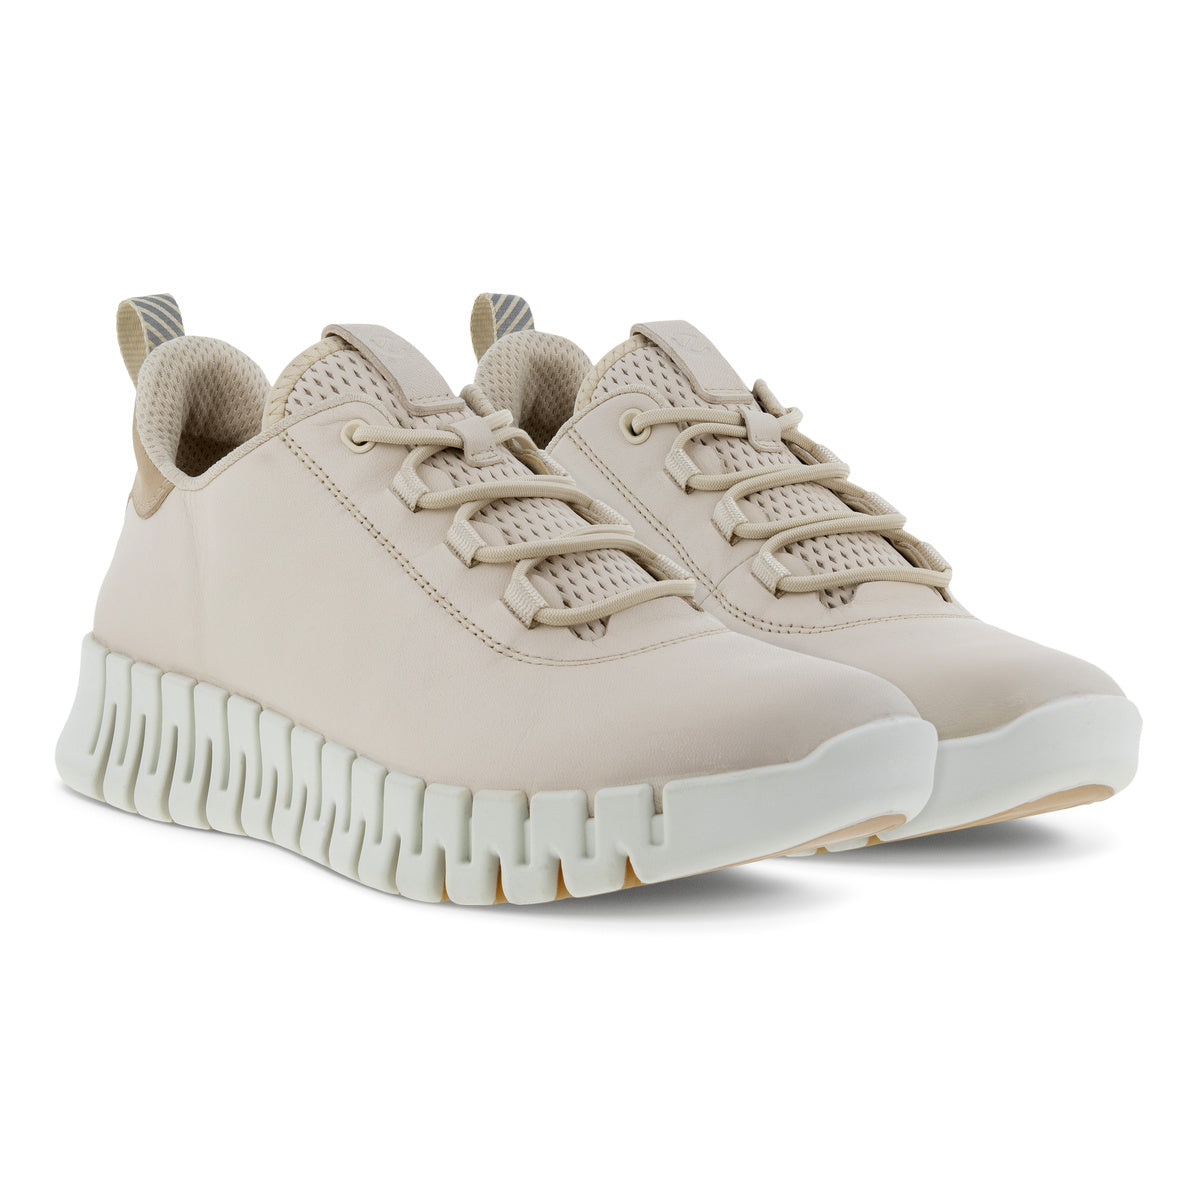 Ecco Gruuv 218203 60720 Ladies Limestone Leather Arch Support Elasticated Trainers